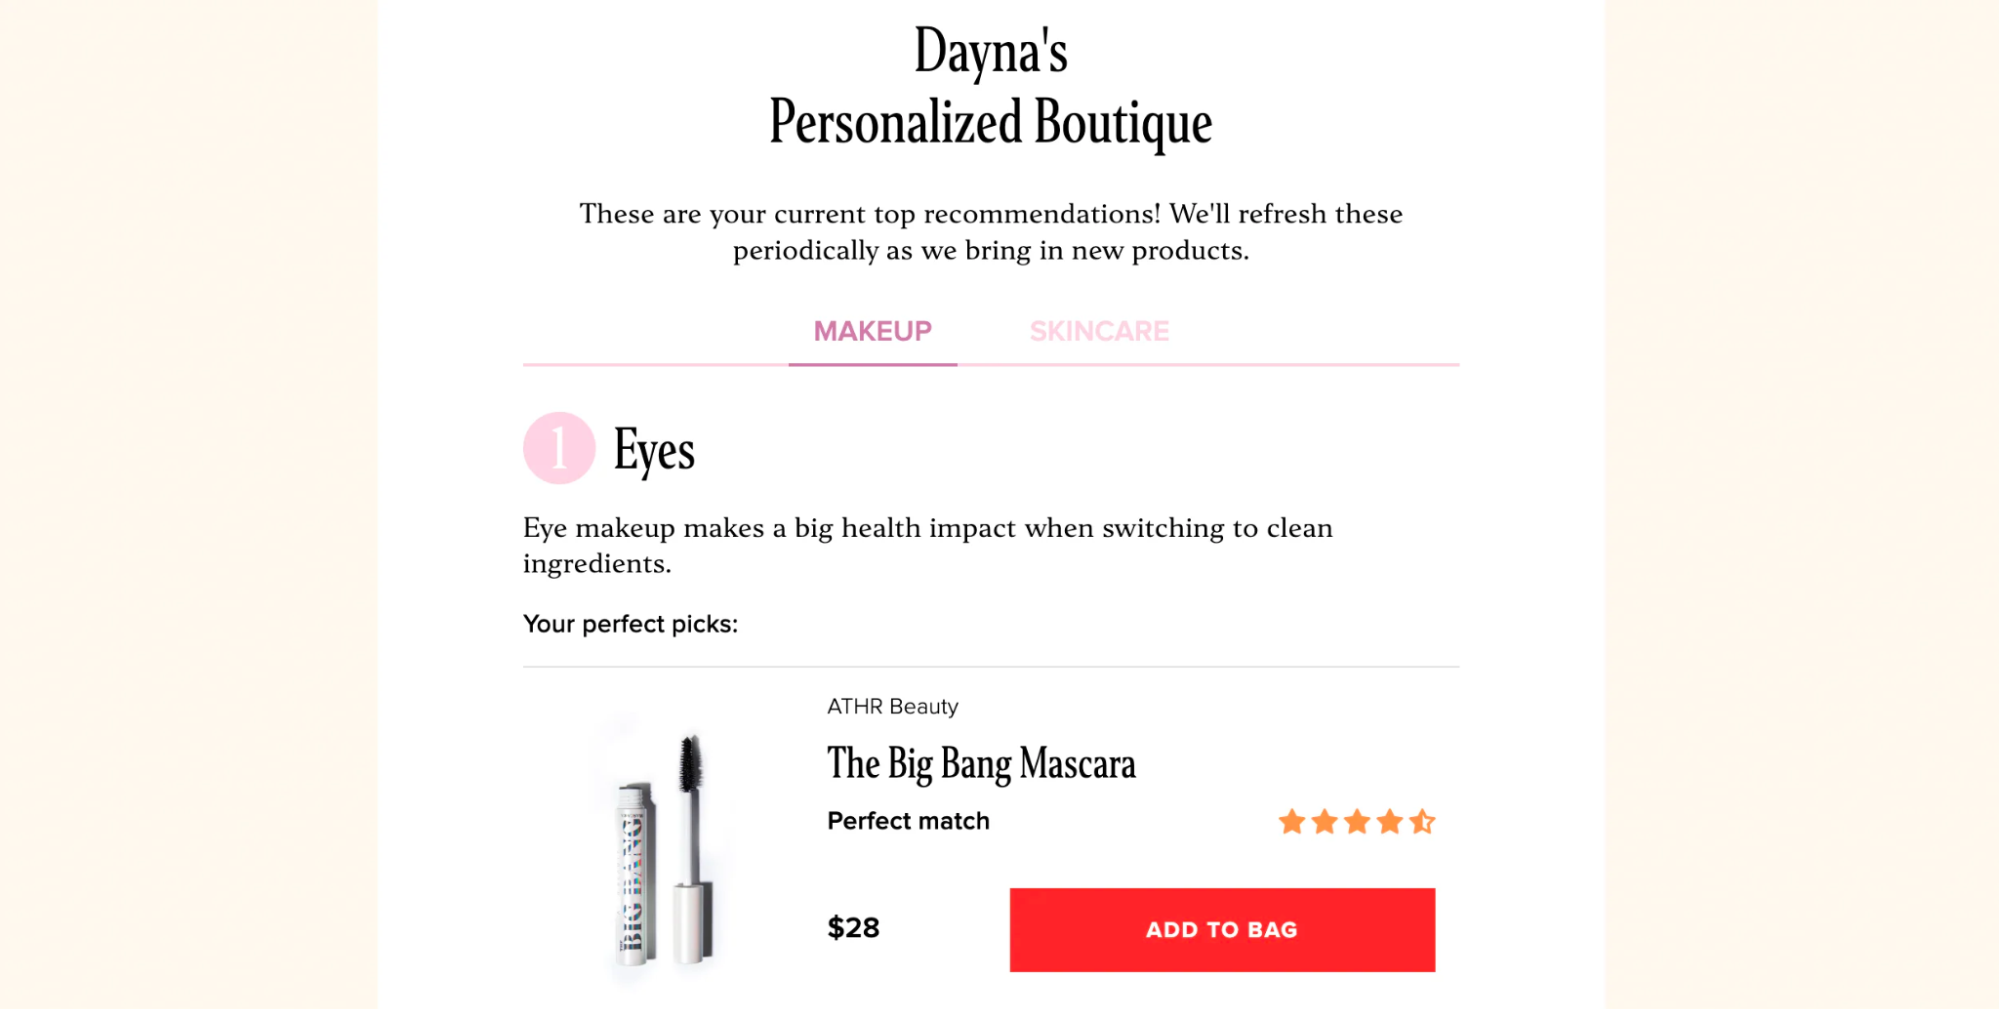 example of cosmetics brand utilizing tailored product suggestions